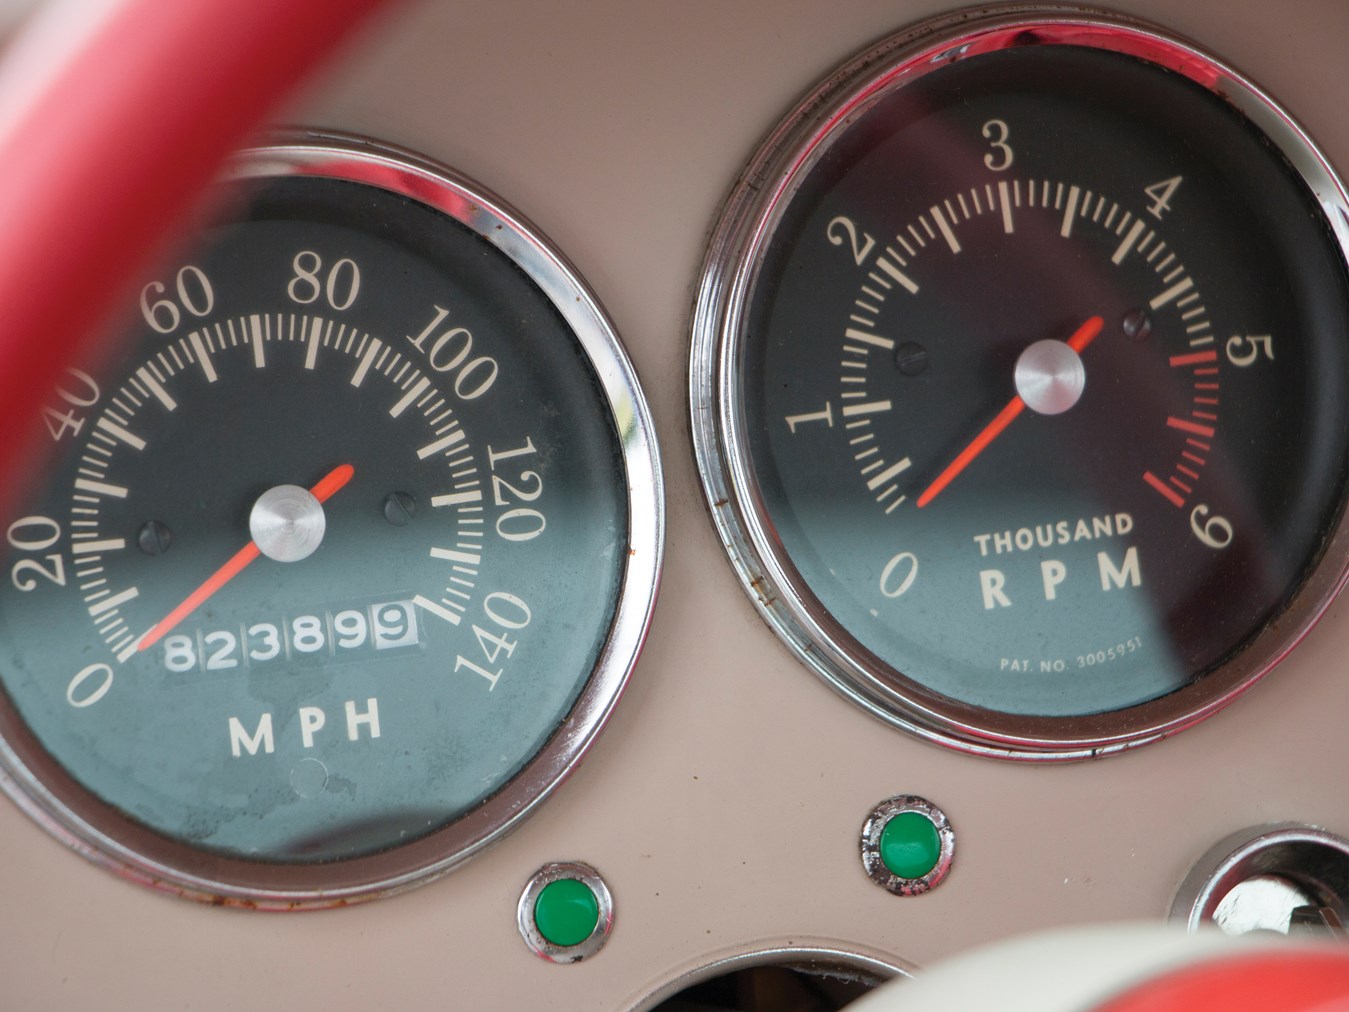 The conventionally aspirated Studebaker Avanti may not be able to exceed the scale of the speedometer but it does a respectable job of trying.